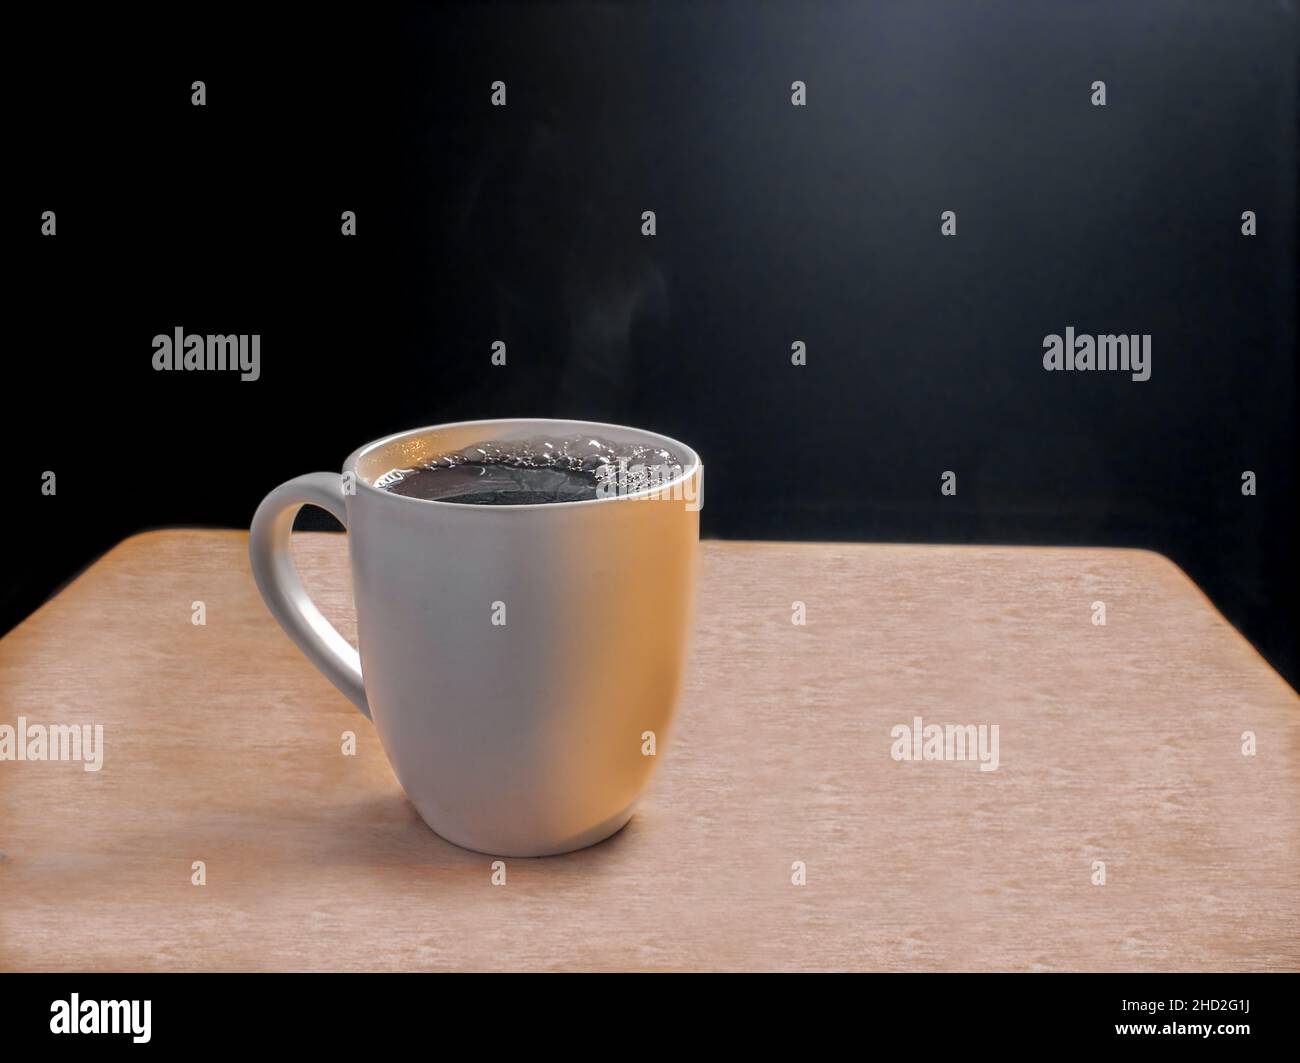 Fresh brewed Cup of black coffee on a wood table against a black background with copy space. Stock Photo